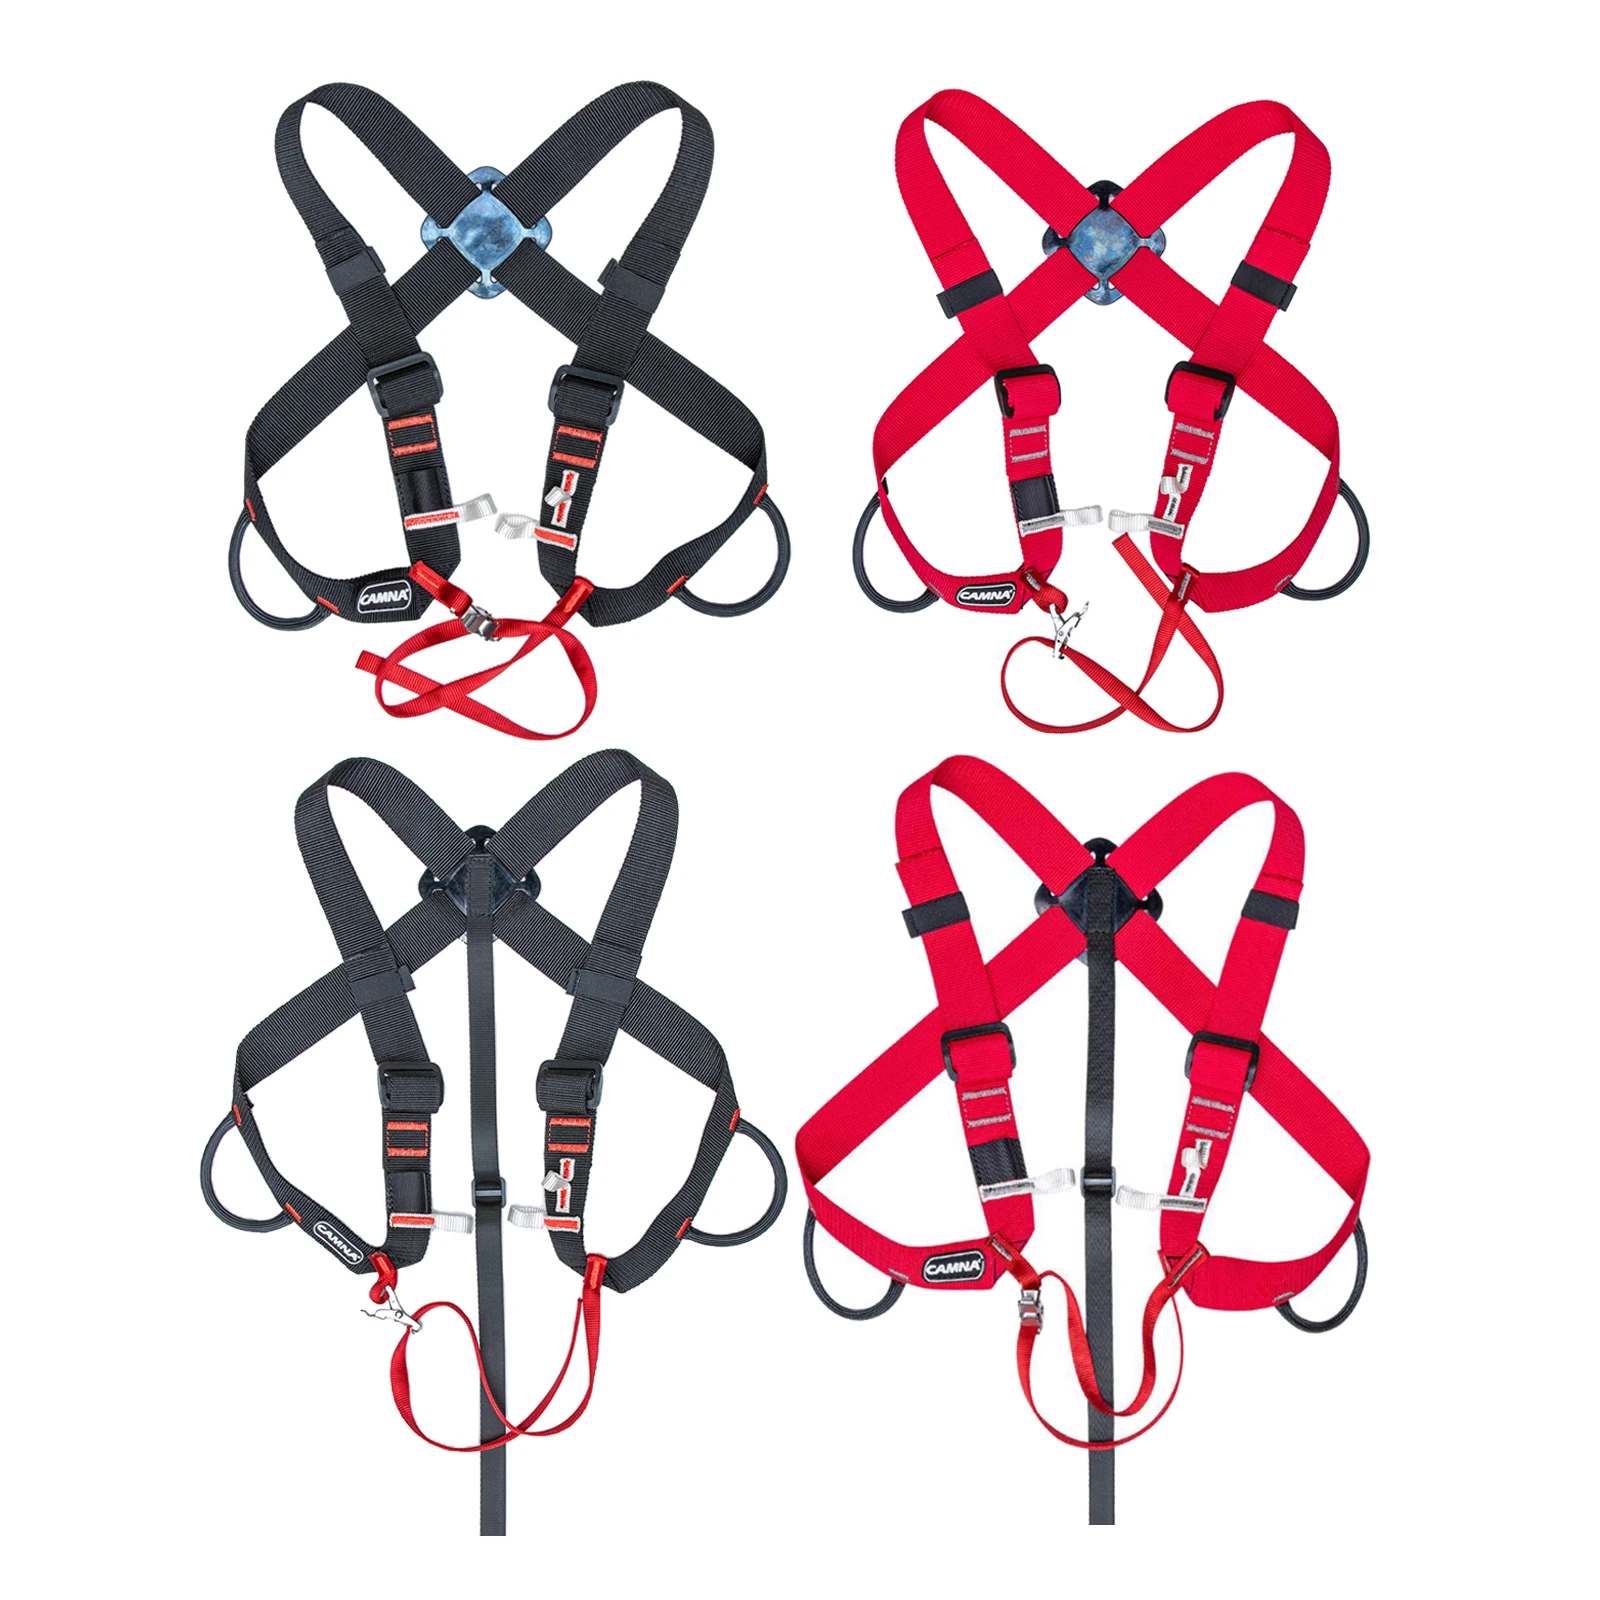 Upper Body Climbing Safety Harness Ascending Protection Fixed Belt Canyoning